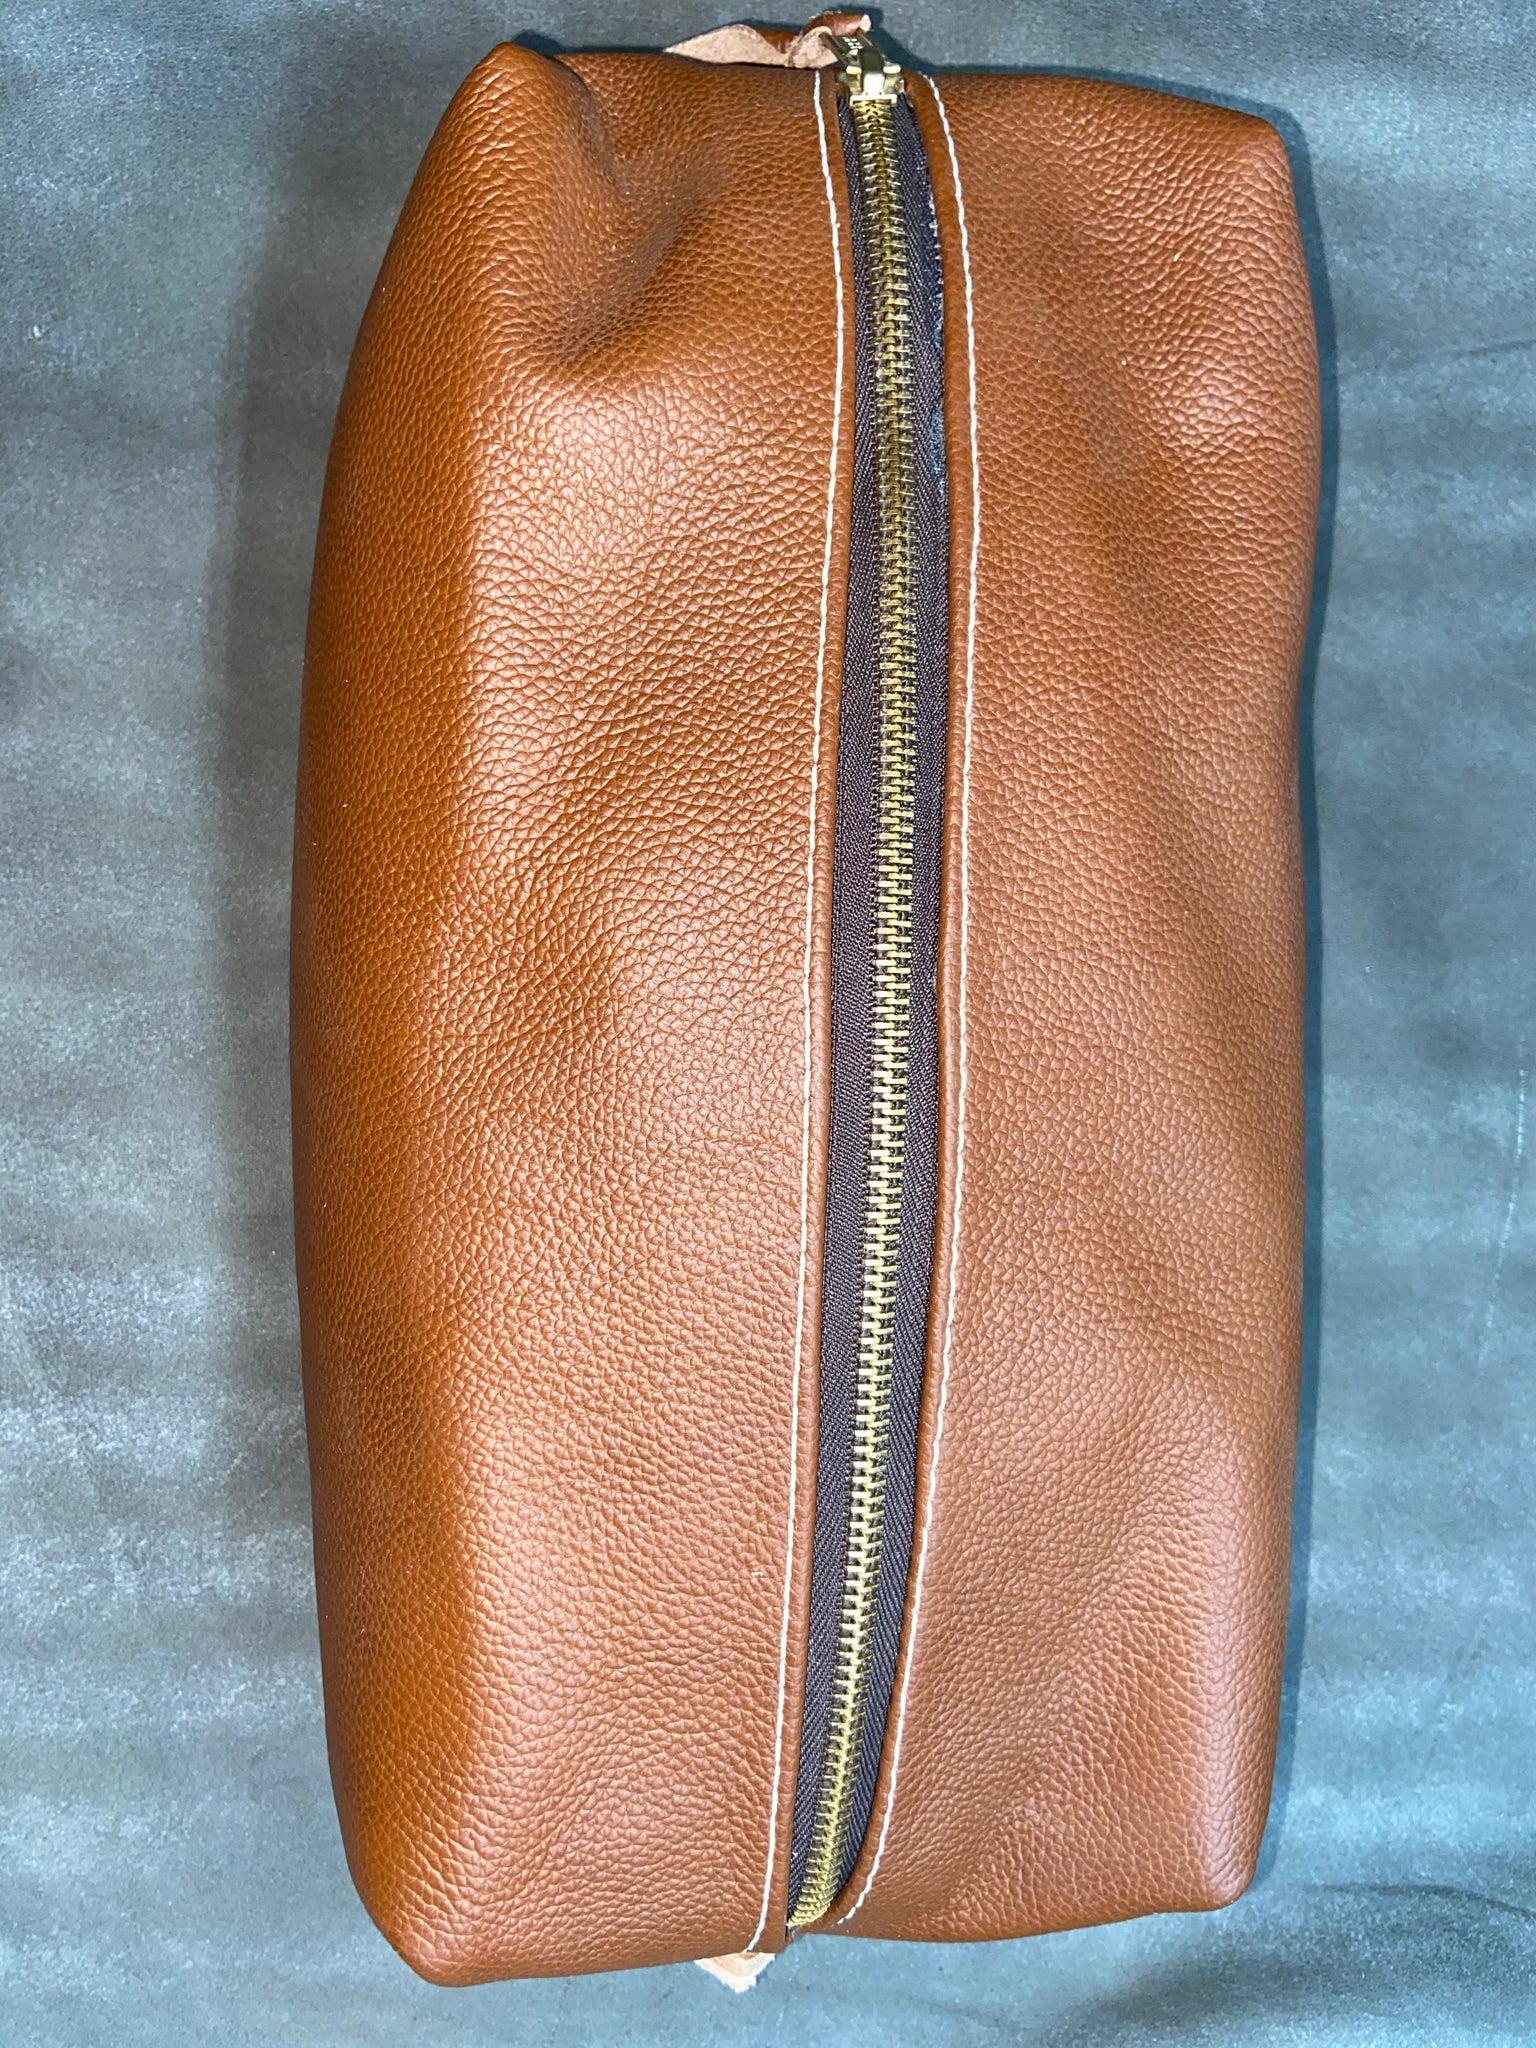 Roll Leather Saddle Bag for Horses, Cantle Bag Saddle, Leather Cantle Bag,  Horse Saddle Bag, Pommel Bag for Saddle, Saddle Roll Bag - Etsy